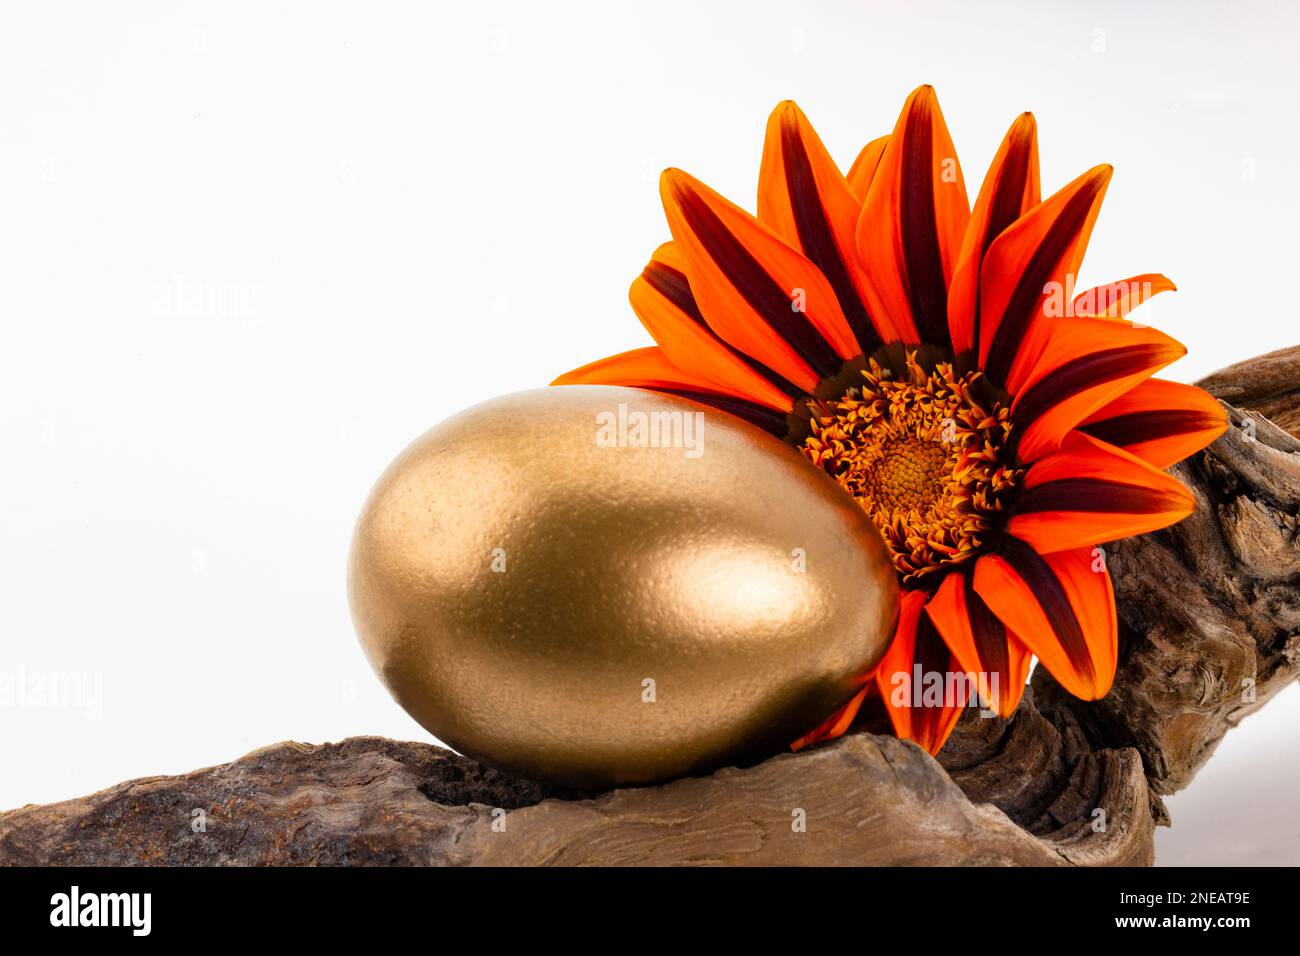 Concept of successful wealth management seen in symbols of gold nest egg, colorful flower, and gnarled wood on white background Stock Photo